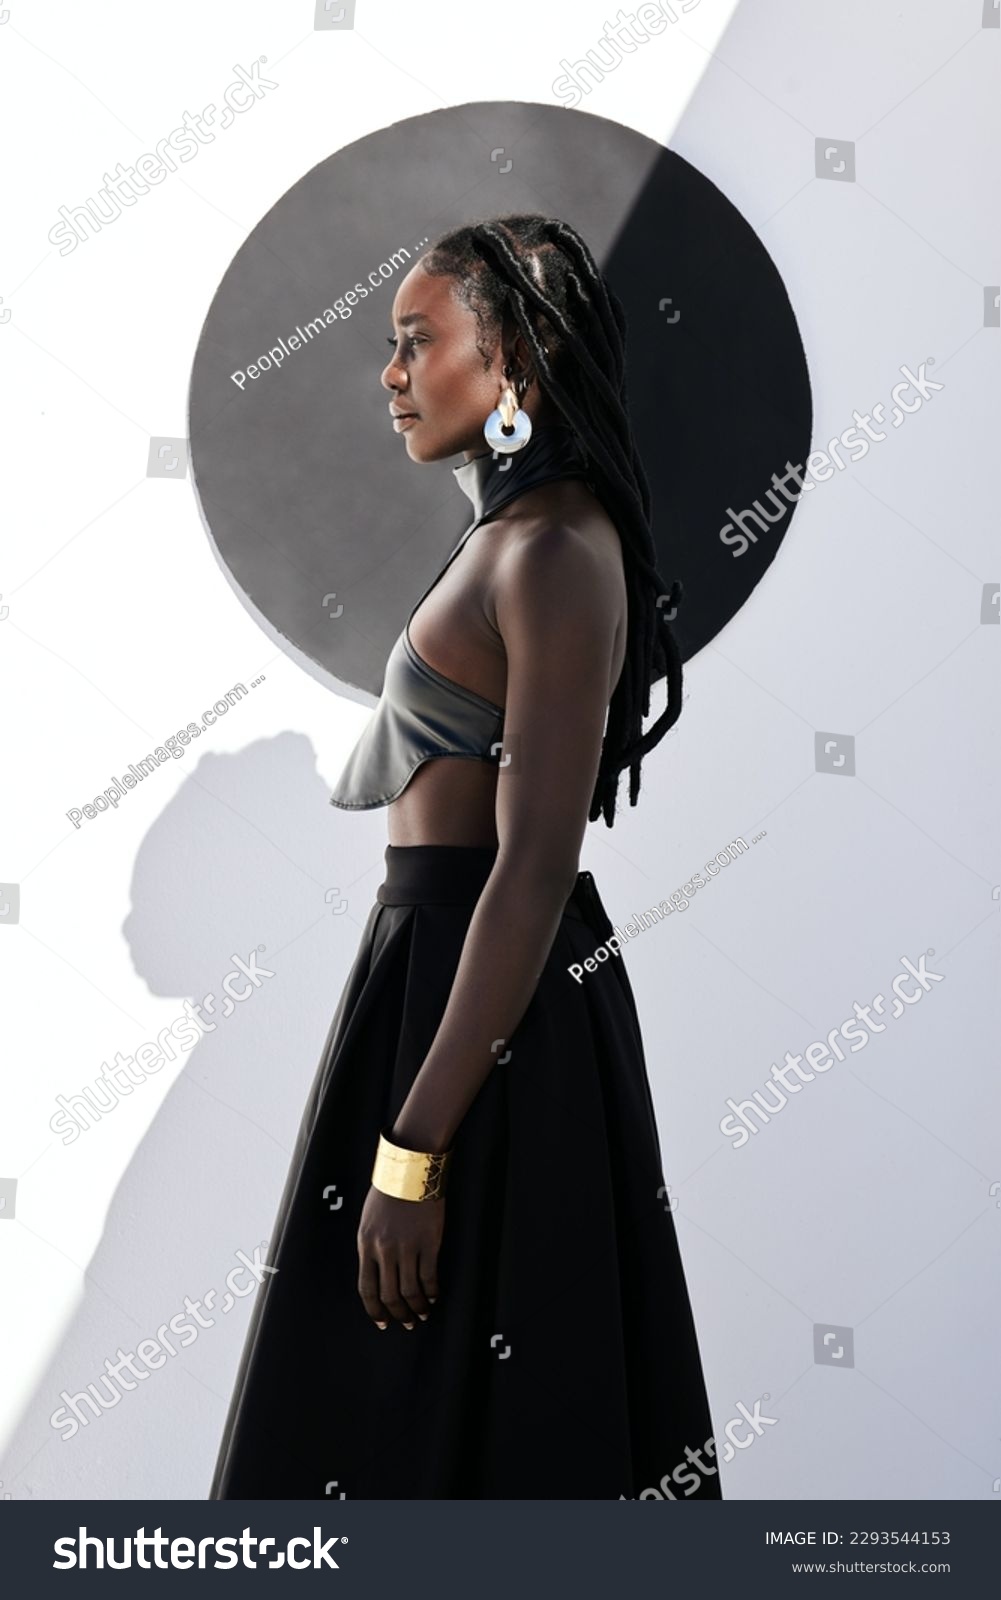 Fierce and fabulous. Shot of an attractive young woman posing in a black outfit against a wall with a circle on it. #2293544153